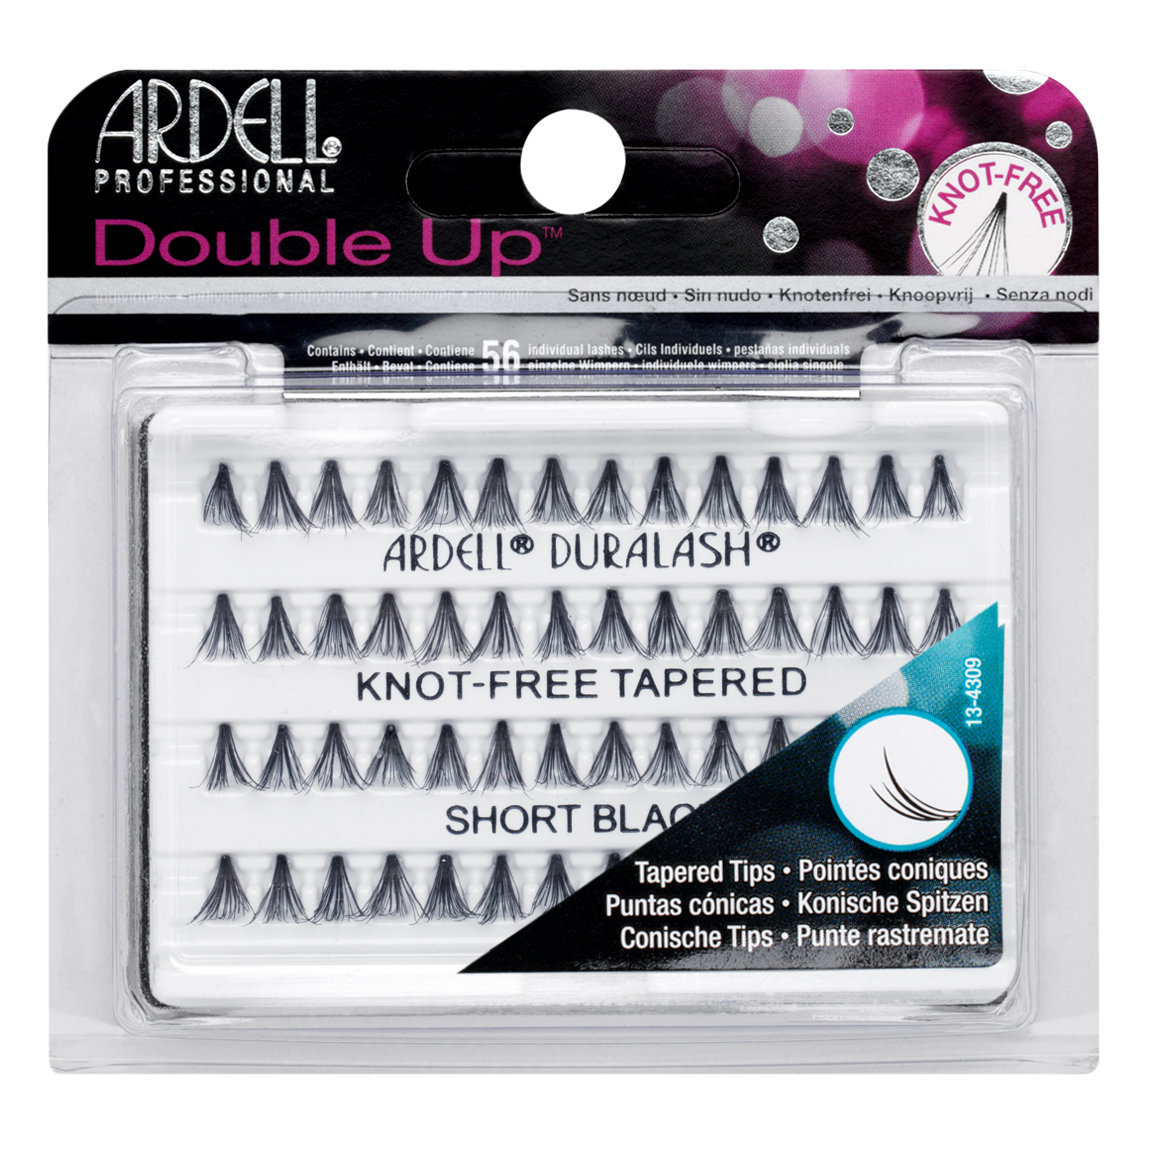 Ardell Double Up Soft Touch Individuals Knot-Free Lashes  Double Up Short Black alternative view 1.